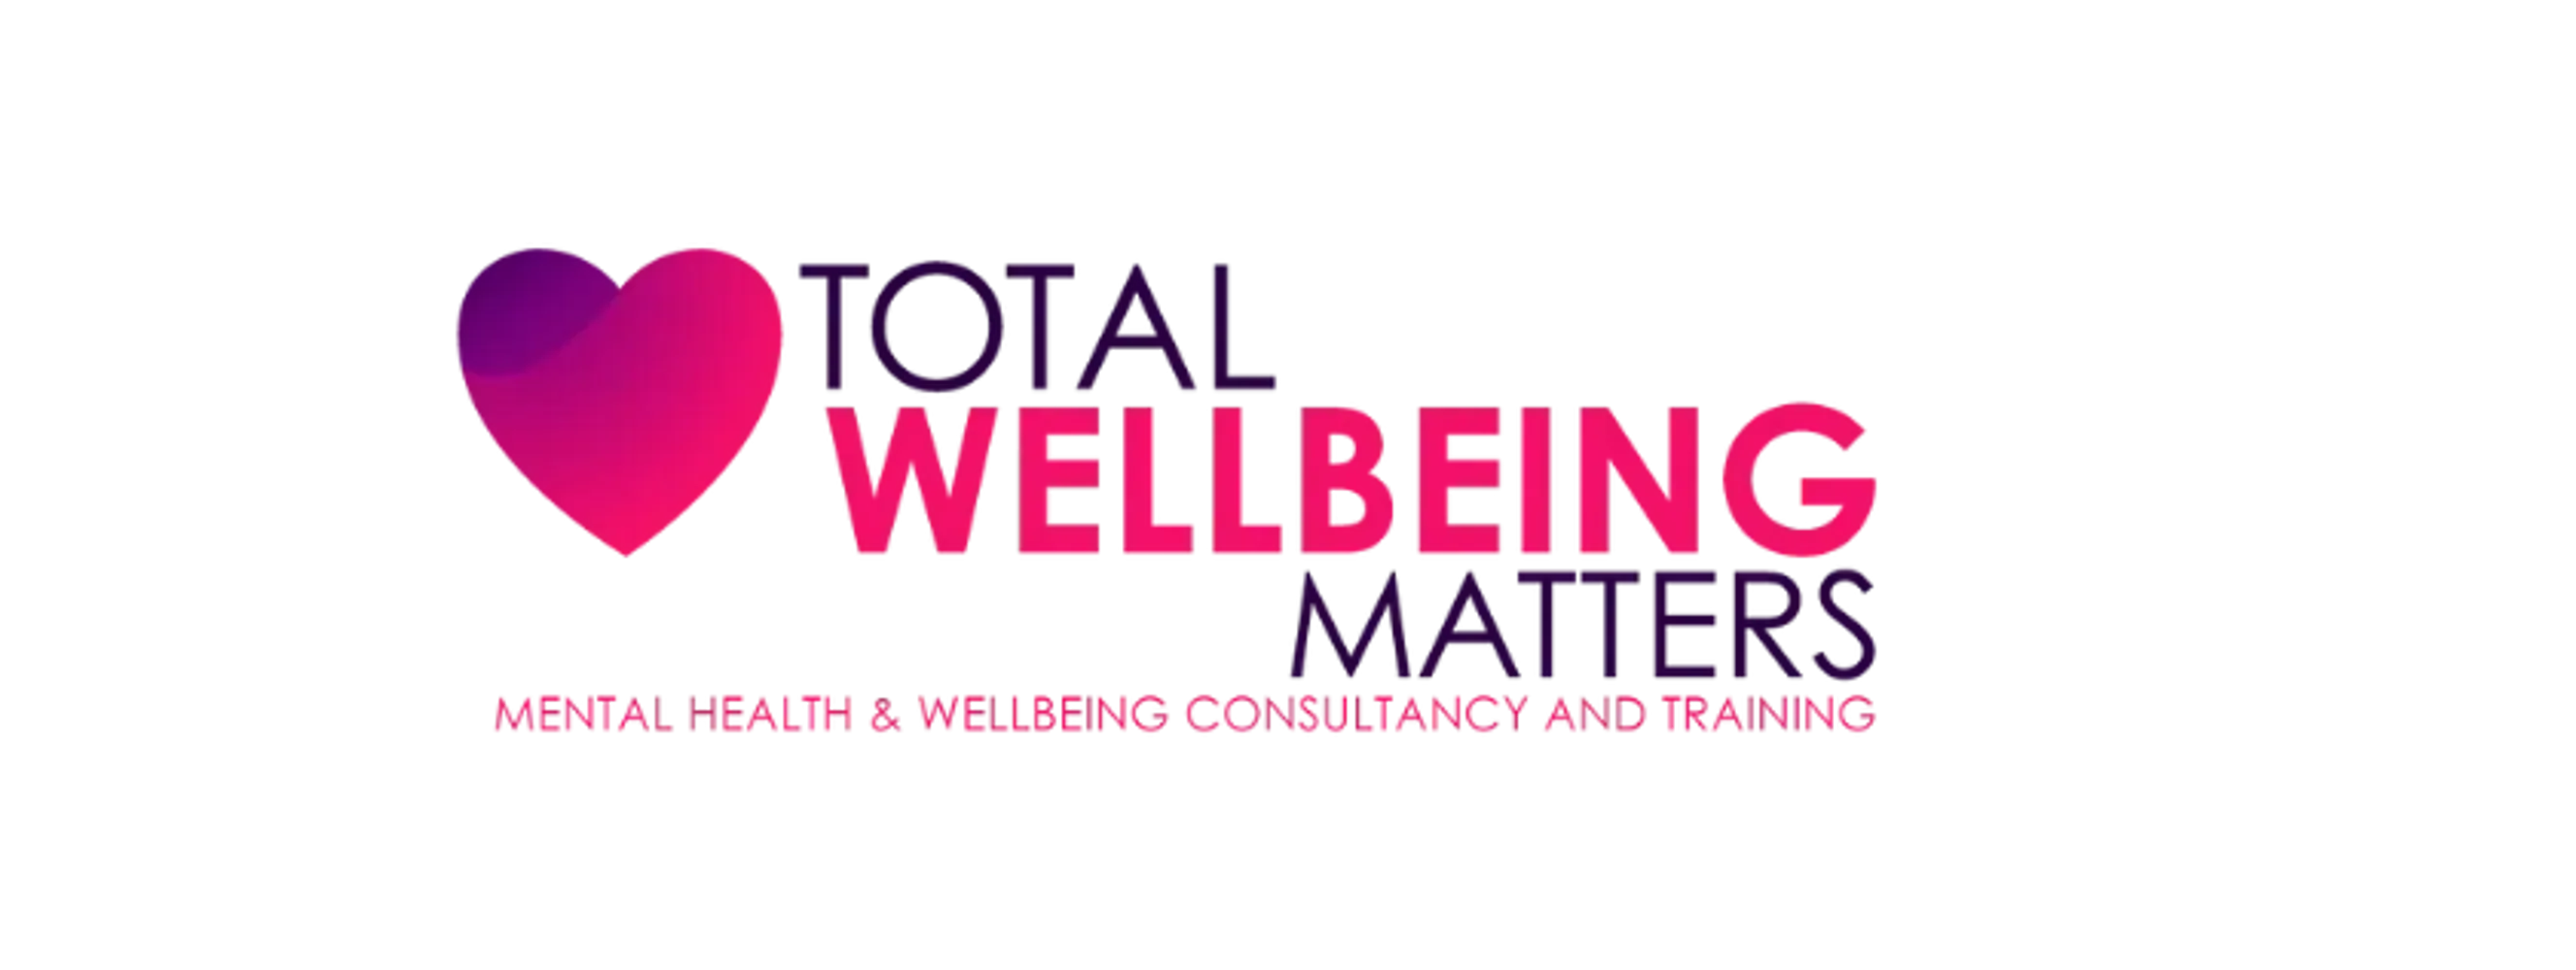 Total Wellbeing Matters logo